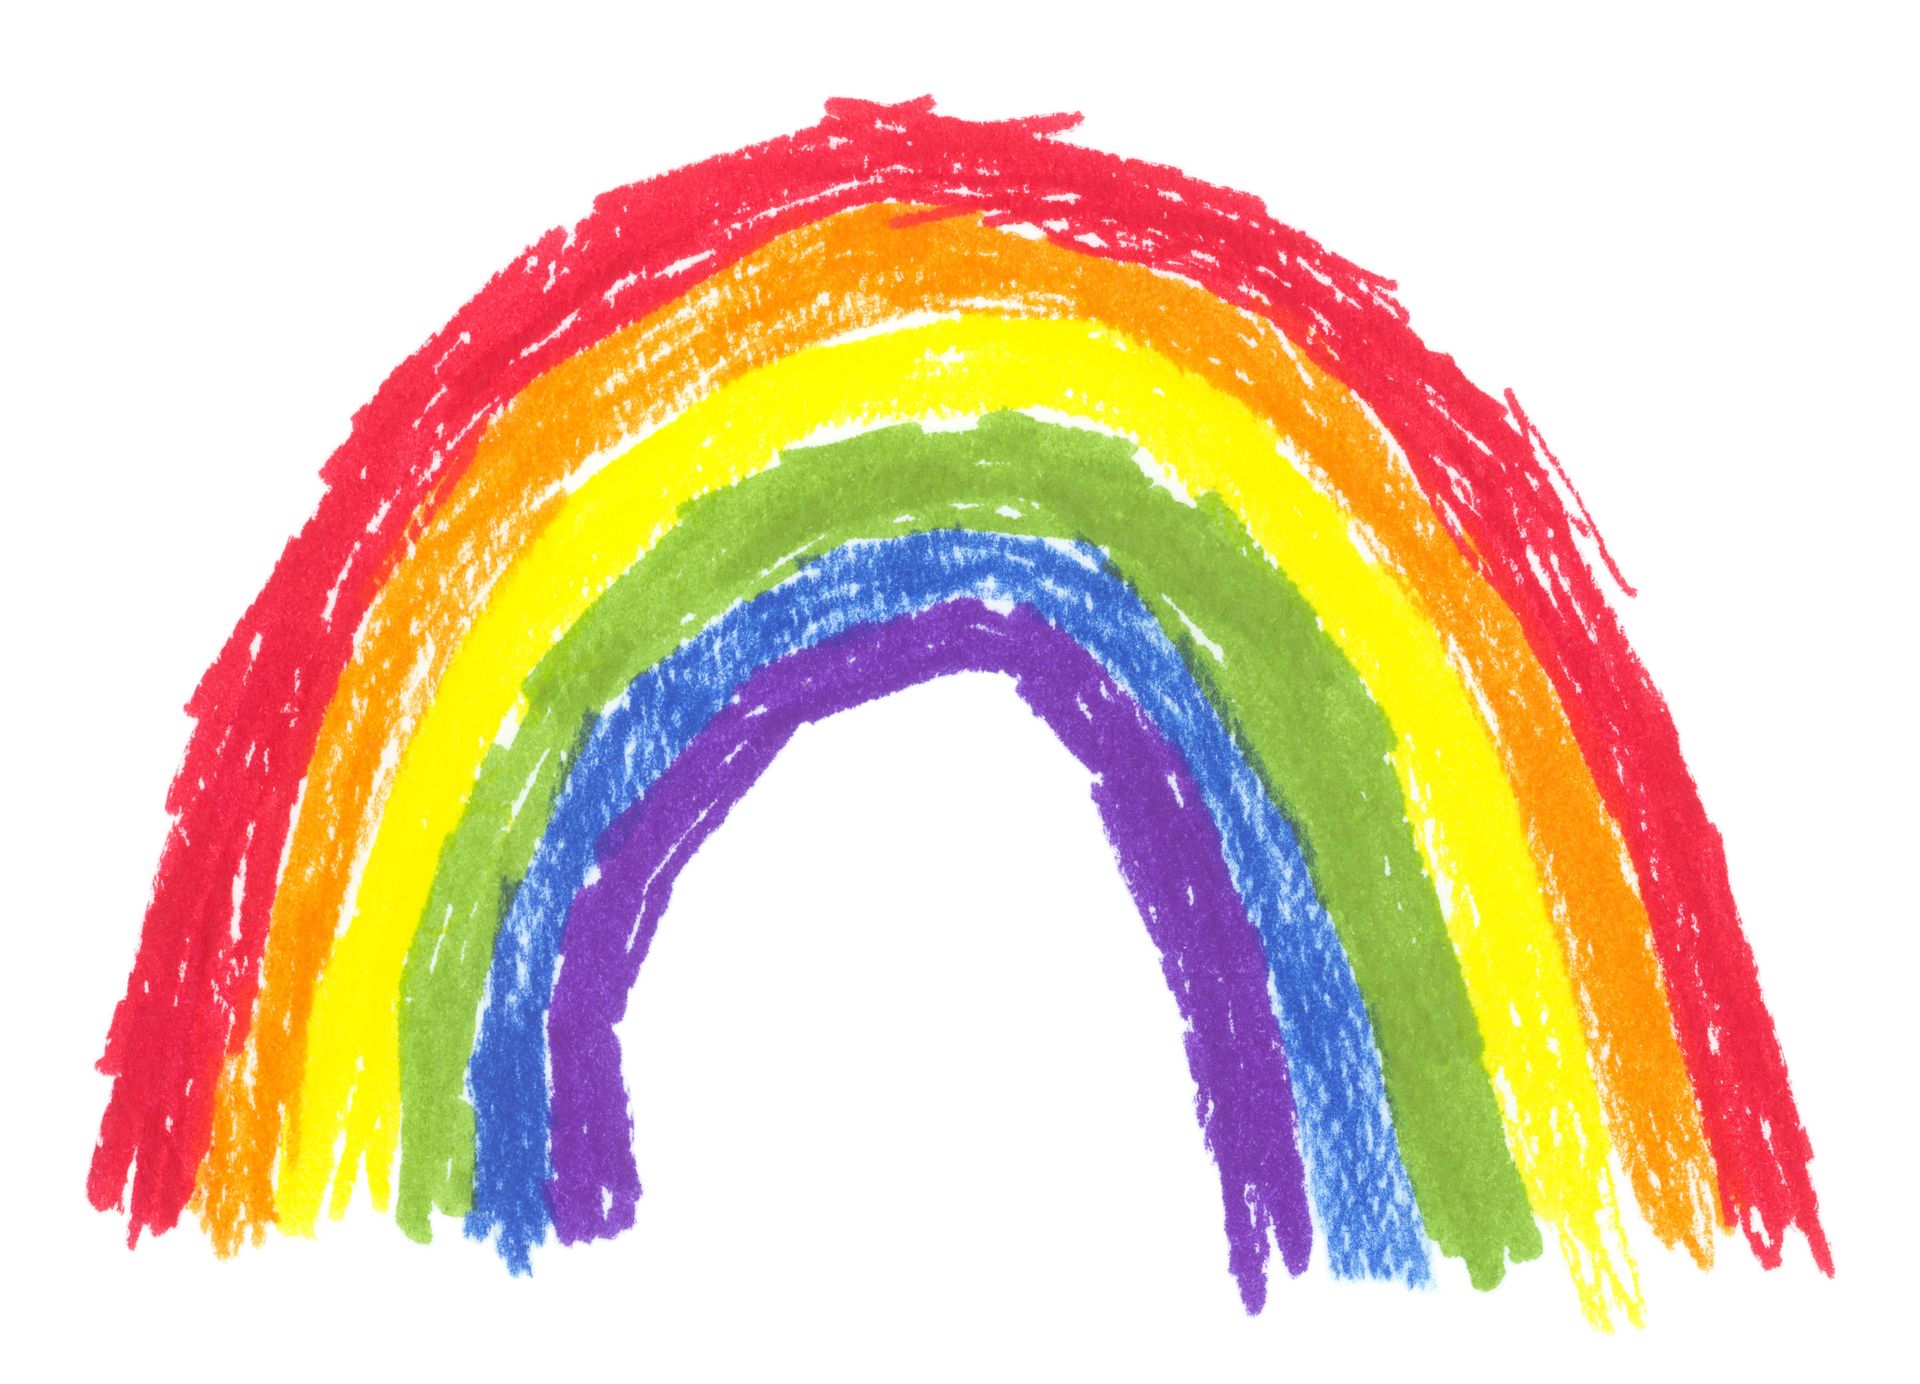 Children's drawing of a rainbow